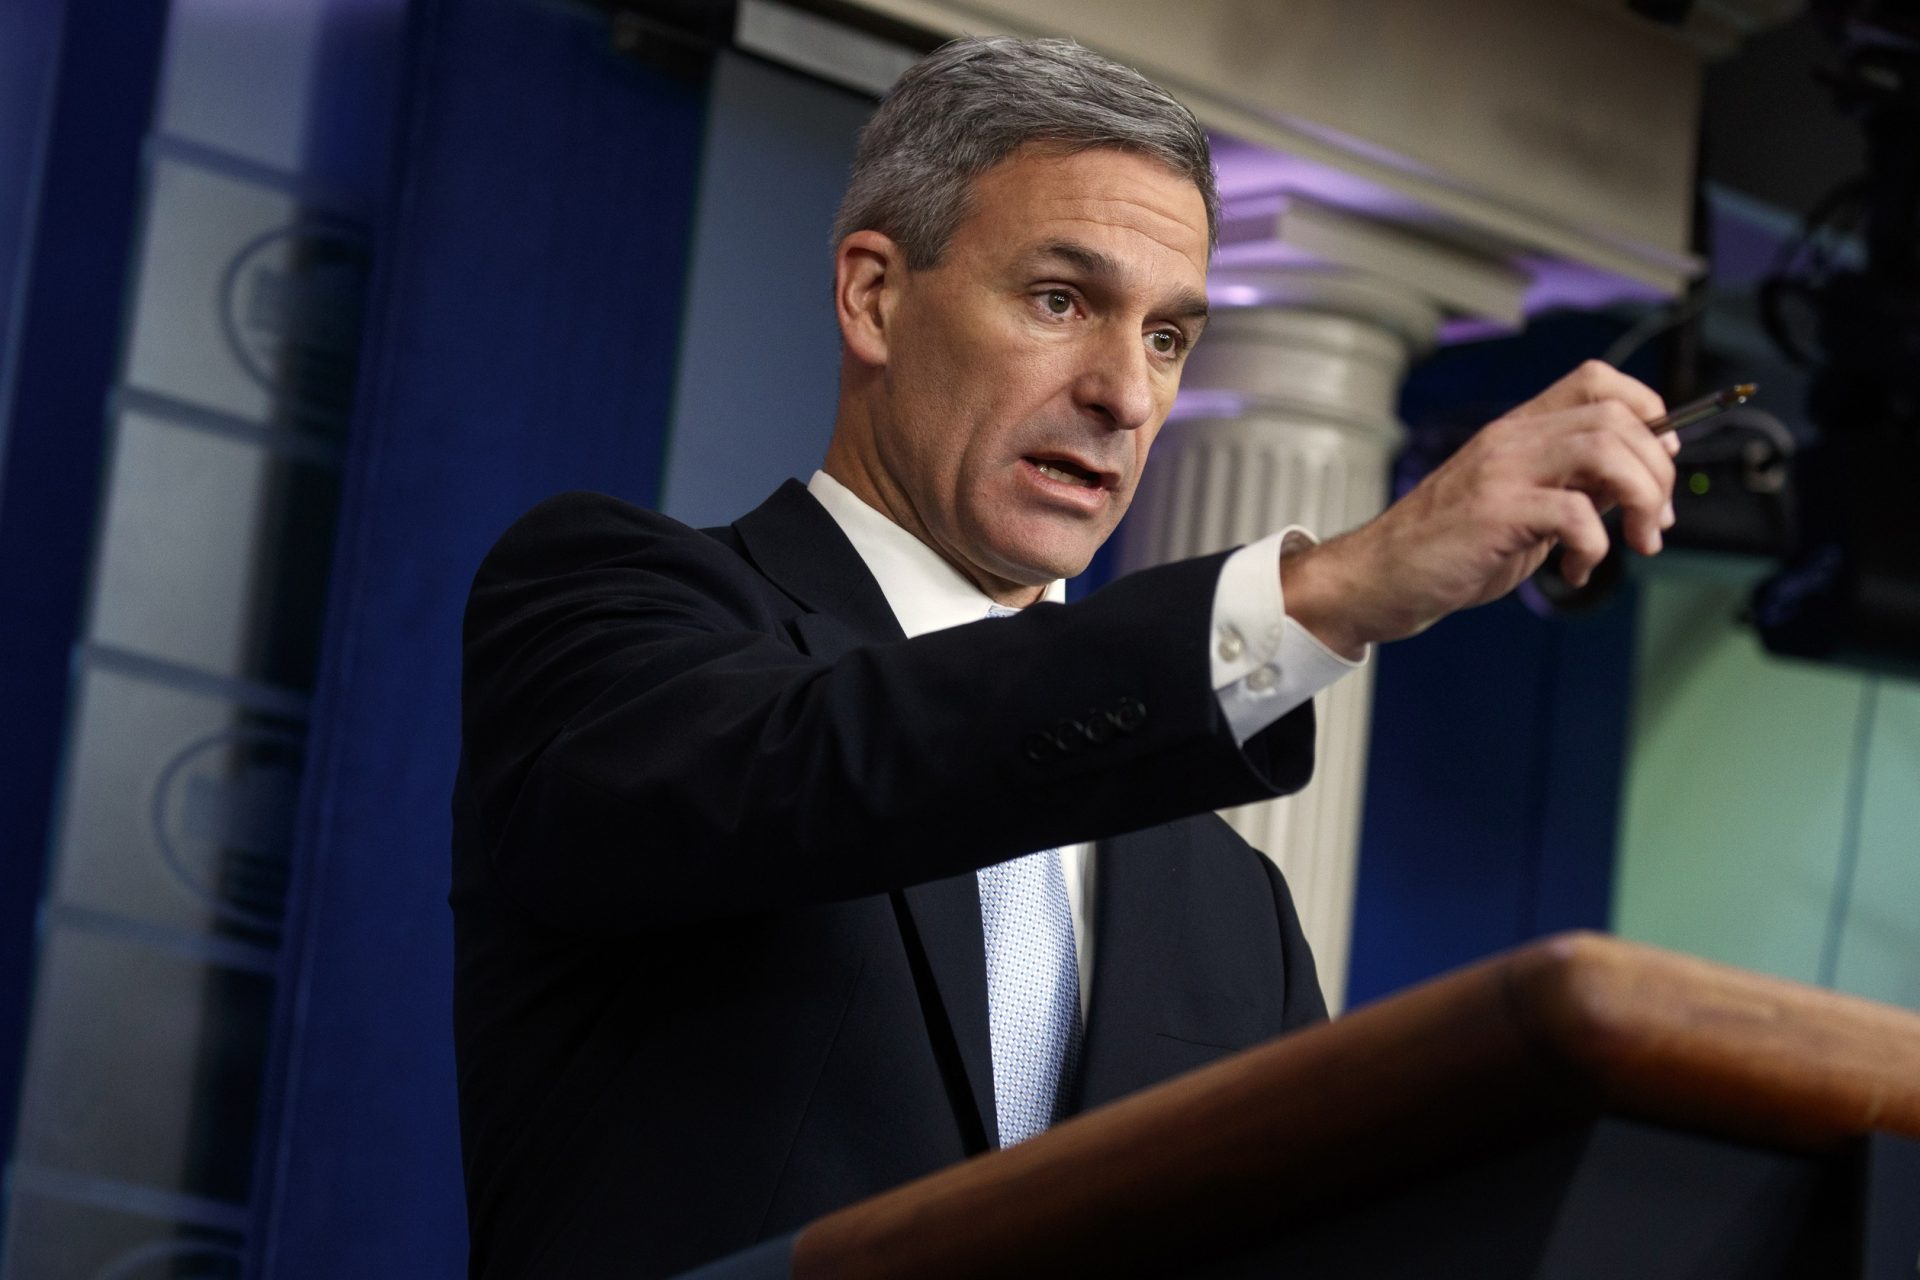 FILE PHOTO: In this Aug. 12, 2019 file photo Acting Director of United States Citizenship and Immigration Services Ken Cuccinelli, speaks during a briefing at the White House in Washington. The Trump administration has unveiled new rules that will make it harder for children of some immigrants serving in the military to obtain citizenship. U.S. Citizenship and Immigration Services released updated guidance Wednesday, Aug. 28, 2019, that appears to mostly affect non-citizen service members.